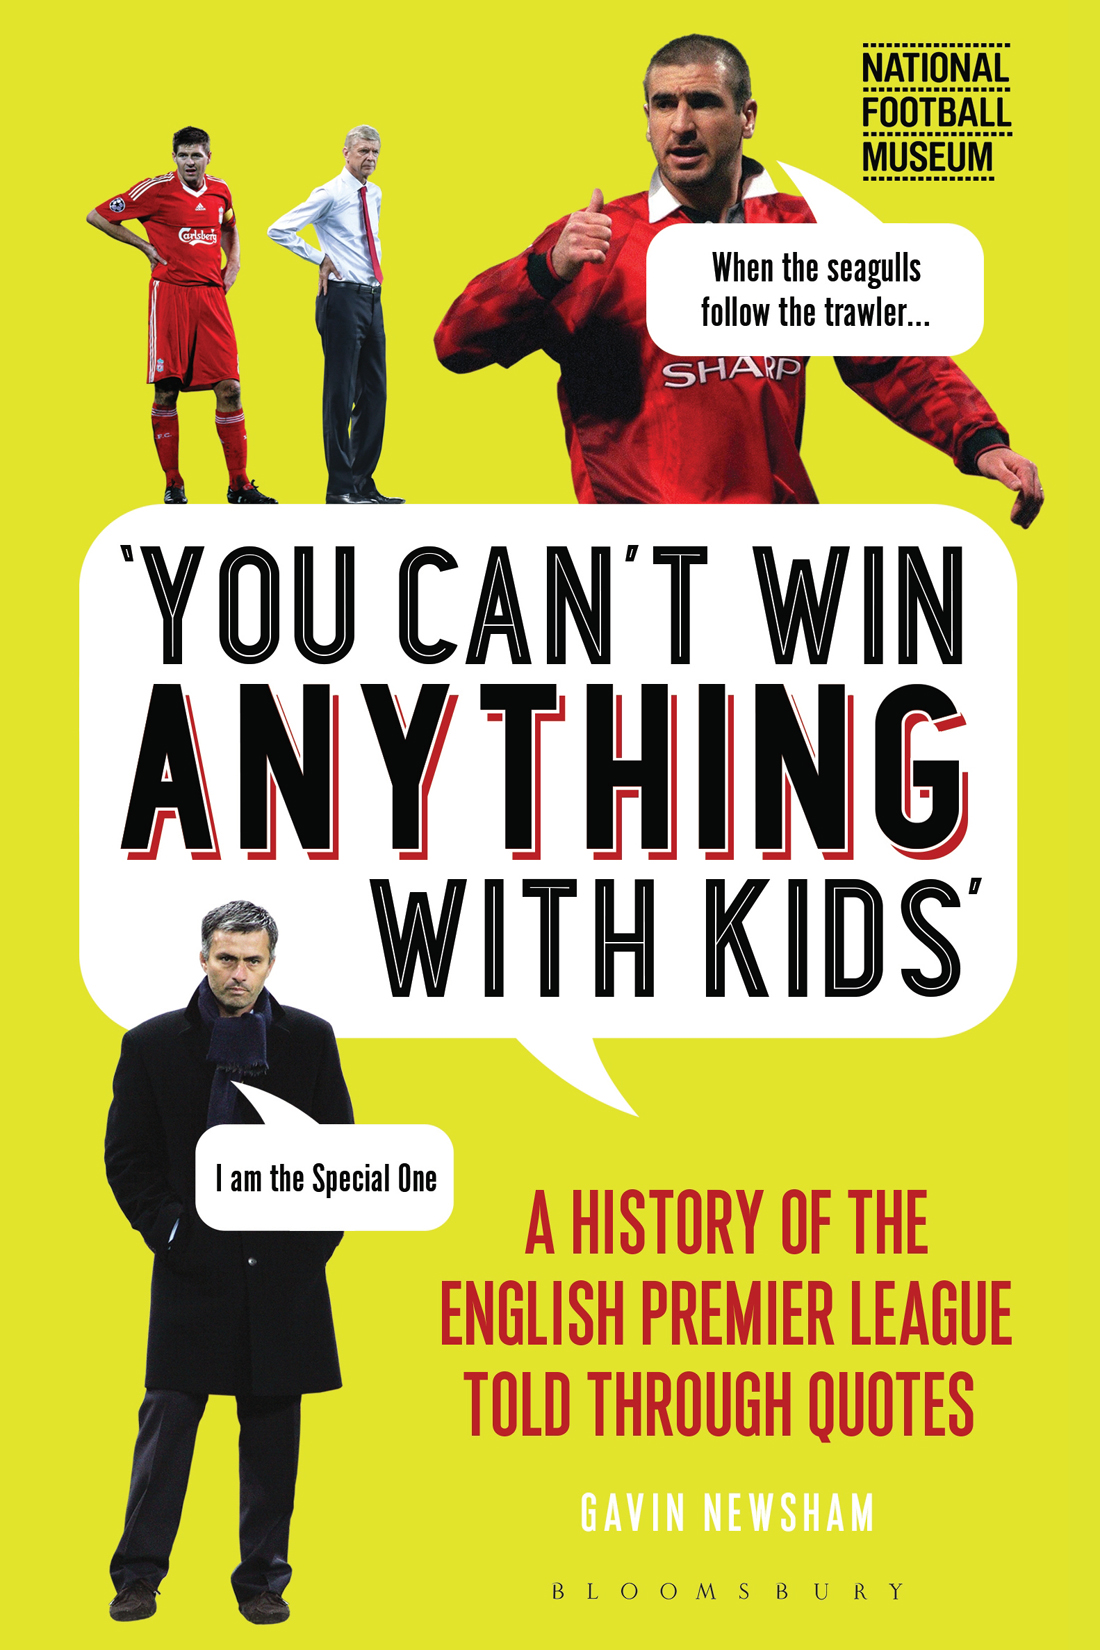 A HISTORY OF THE ENGLISH PREMIER LEAGUE TOLD THROUGH QUOTES GAVIN NEWSHAM - photo 1